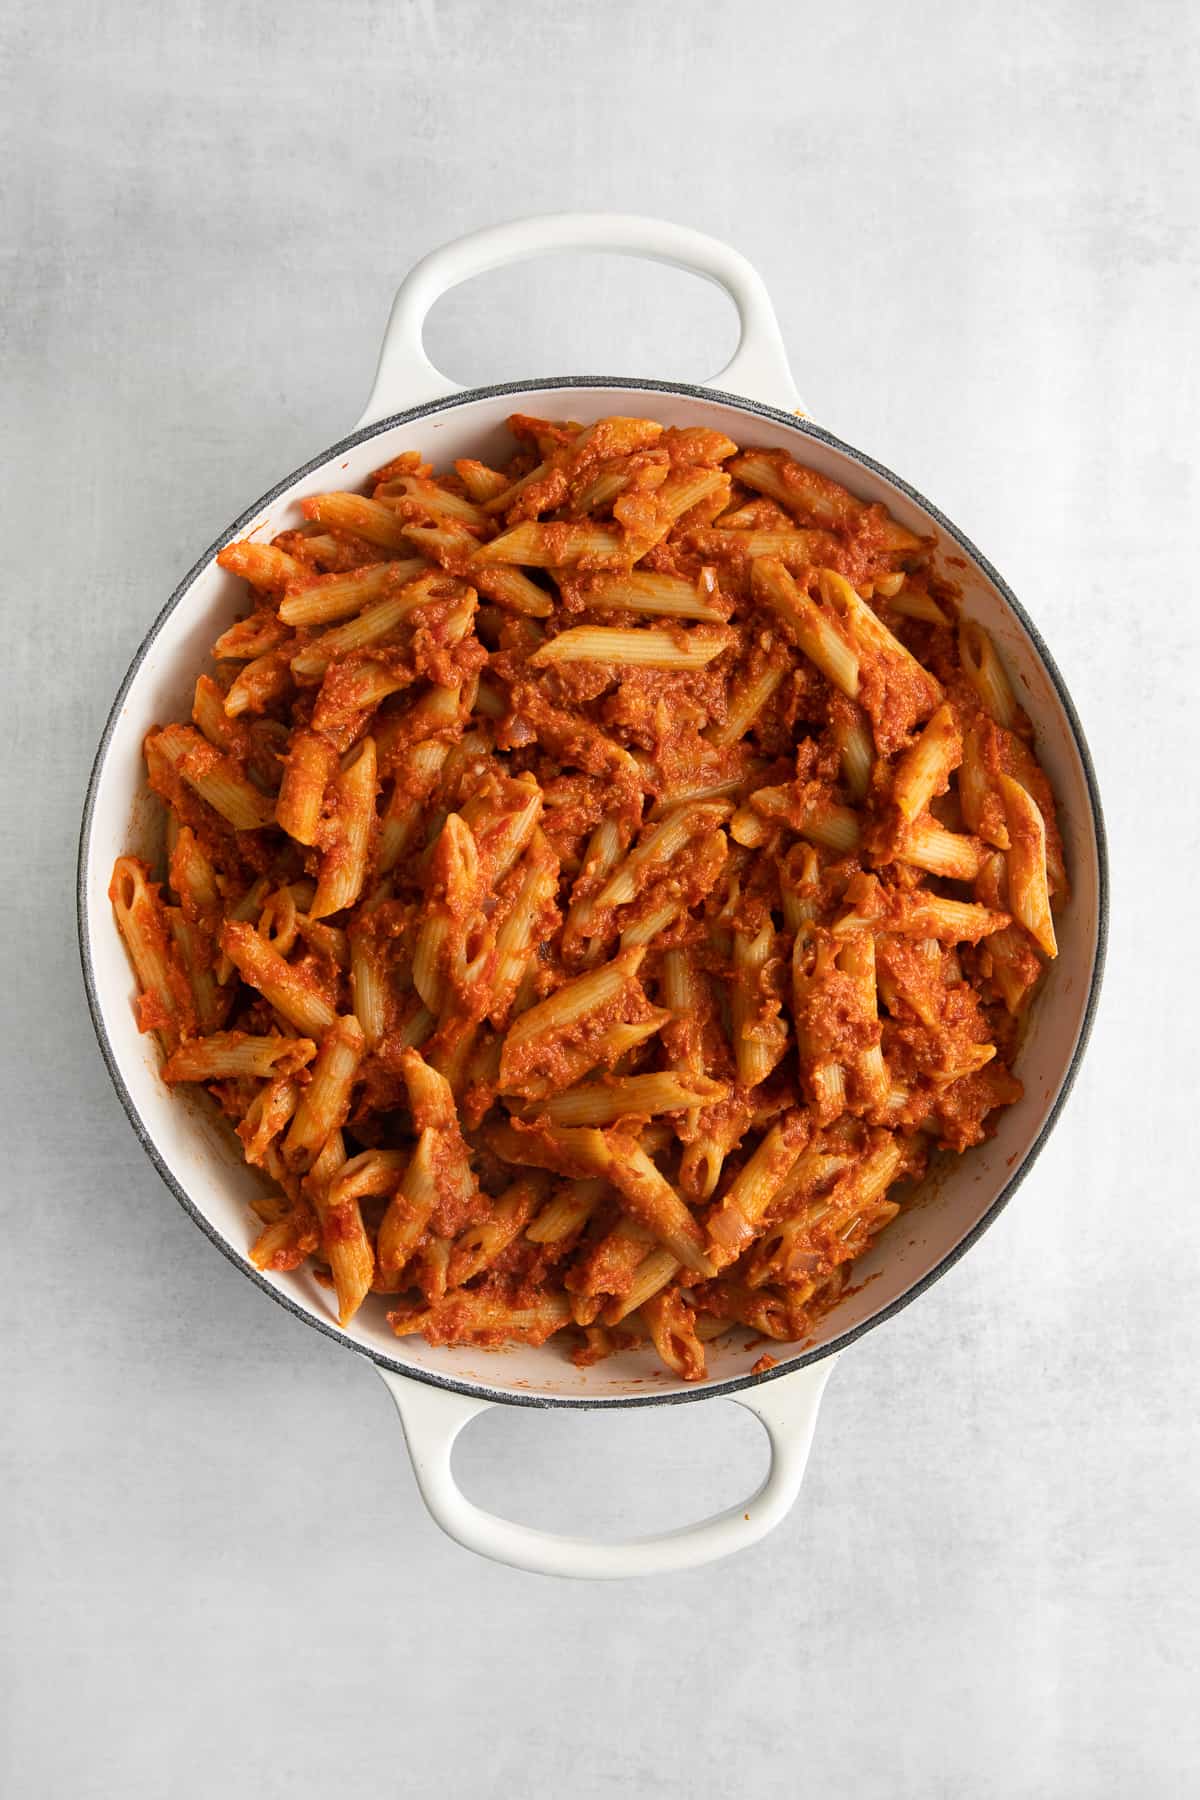 Five cheese marinara sauce on top of penne pasta.